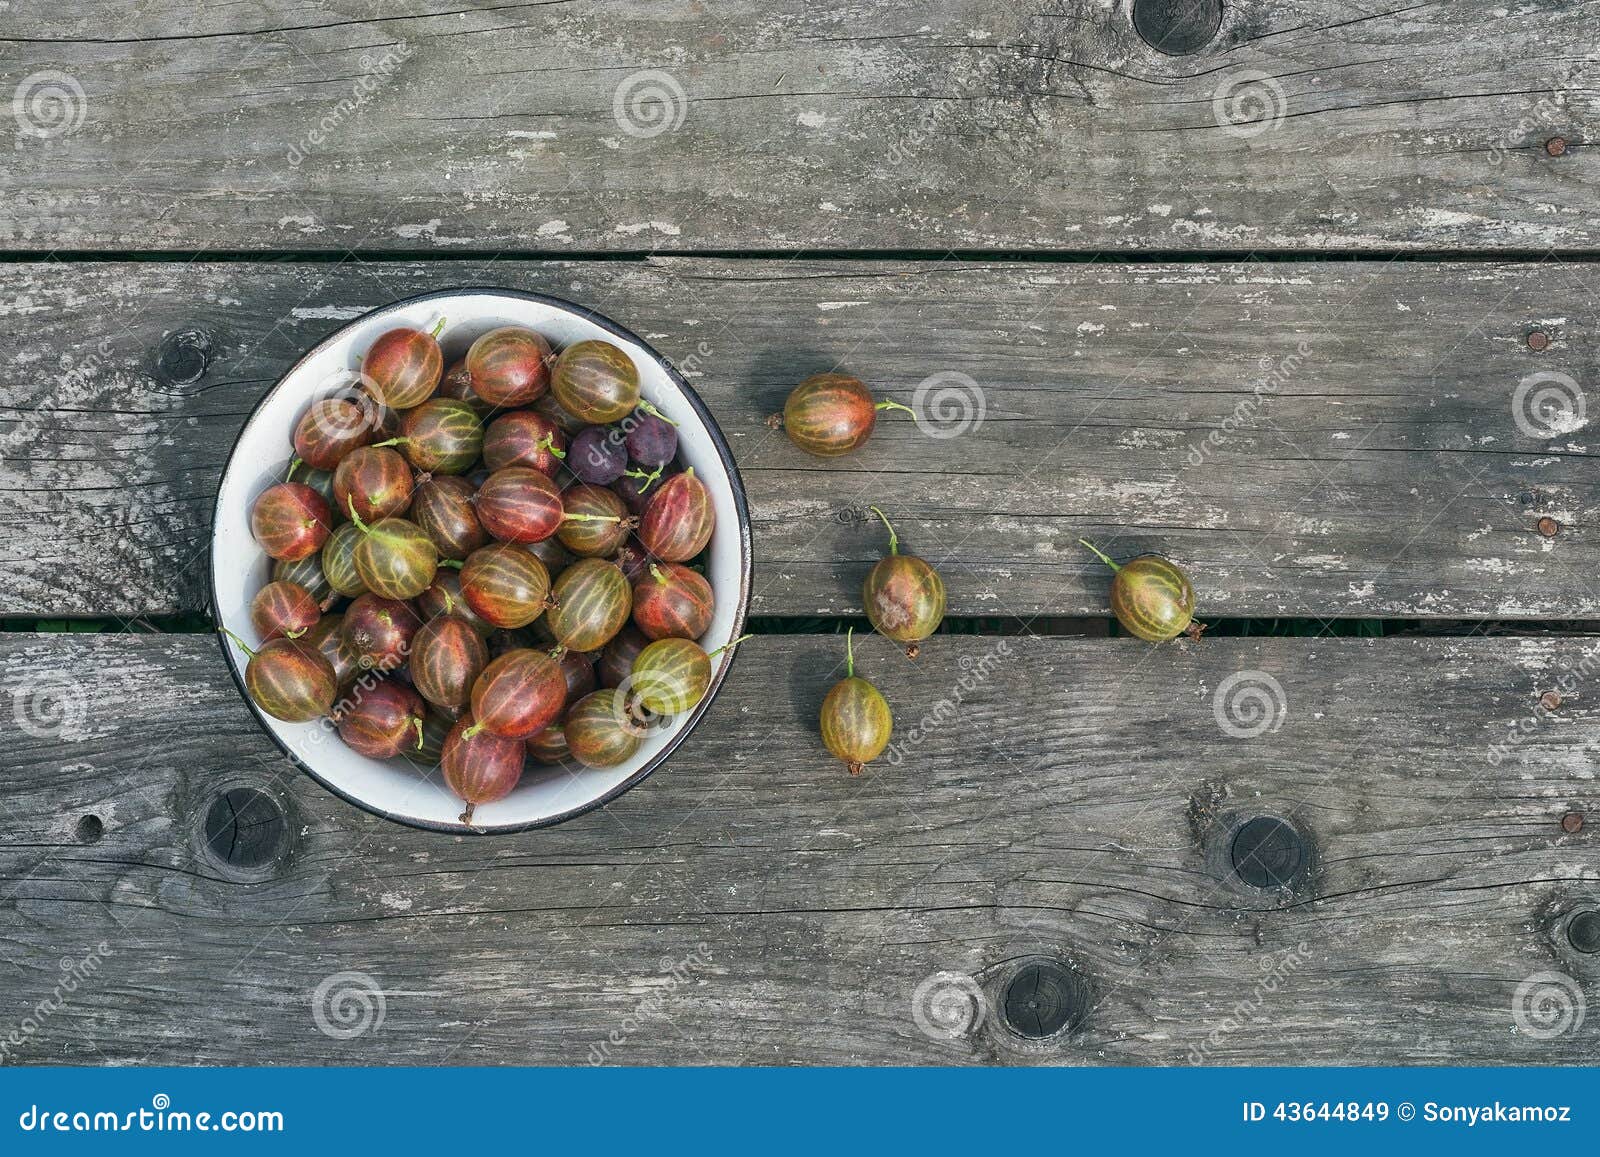 a bawl of gooseberries on a wooden surface